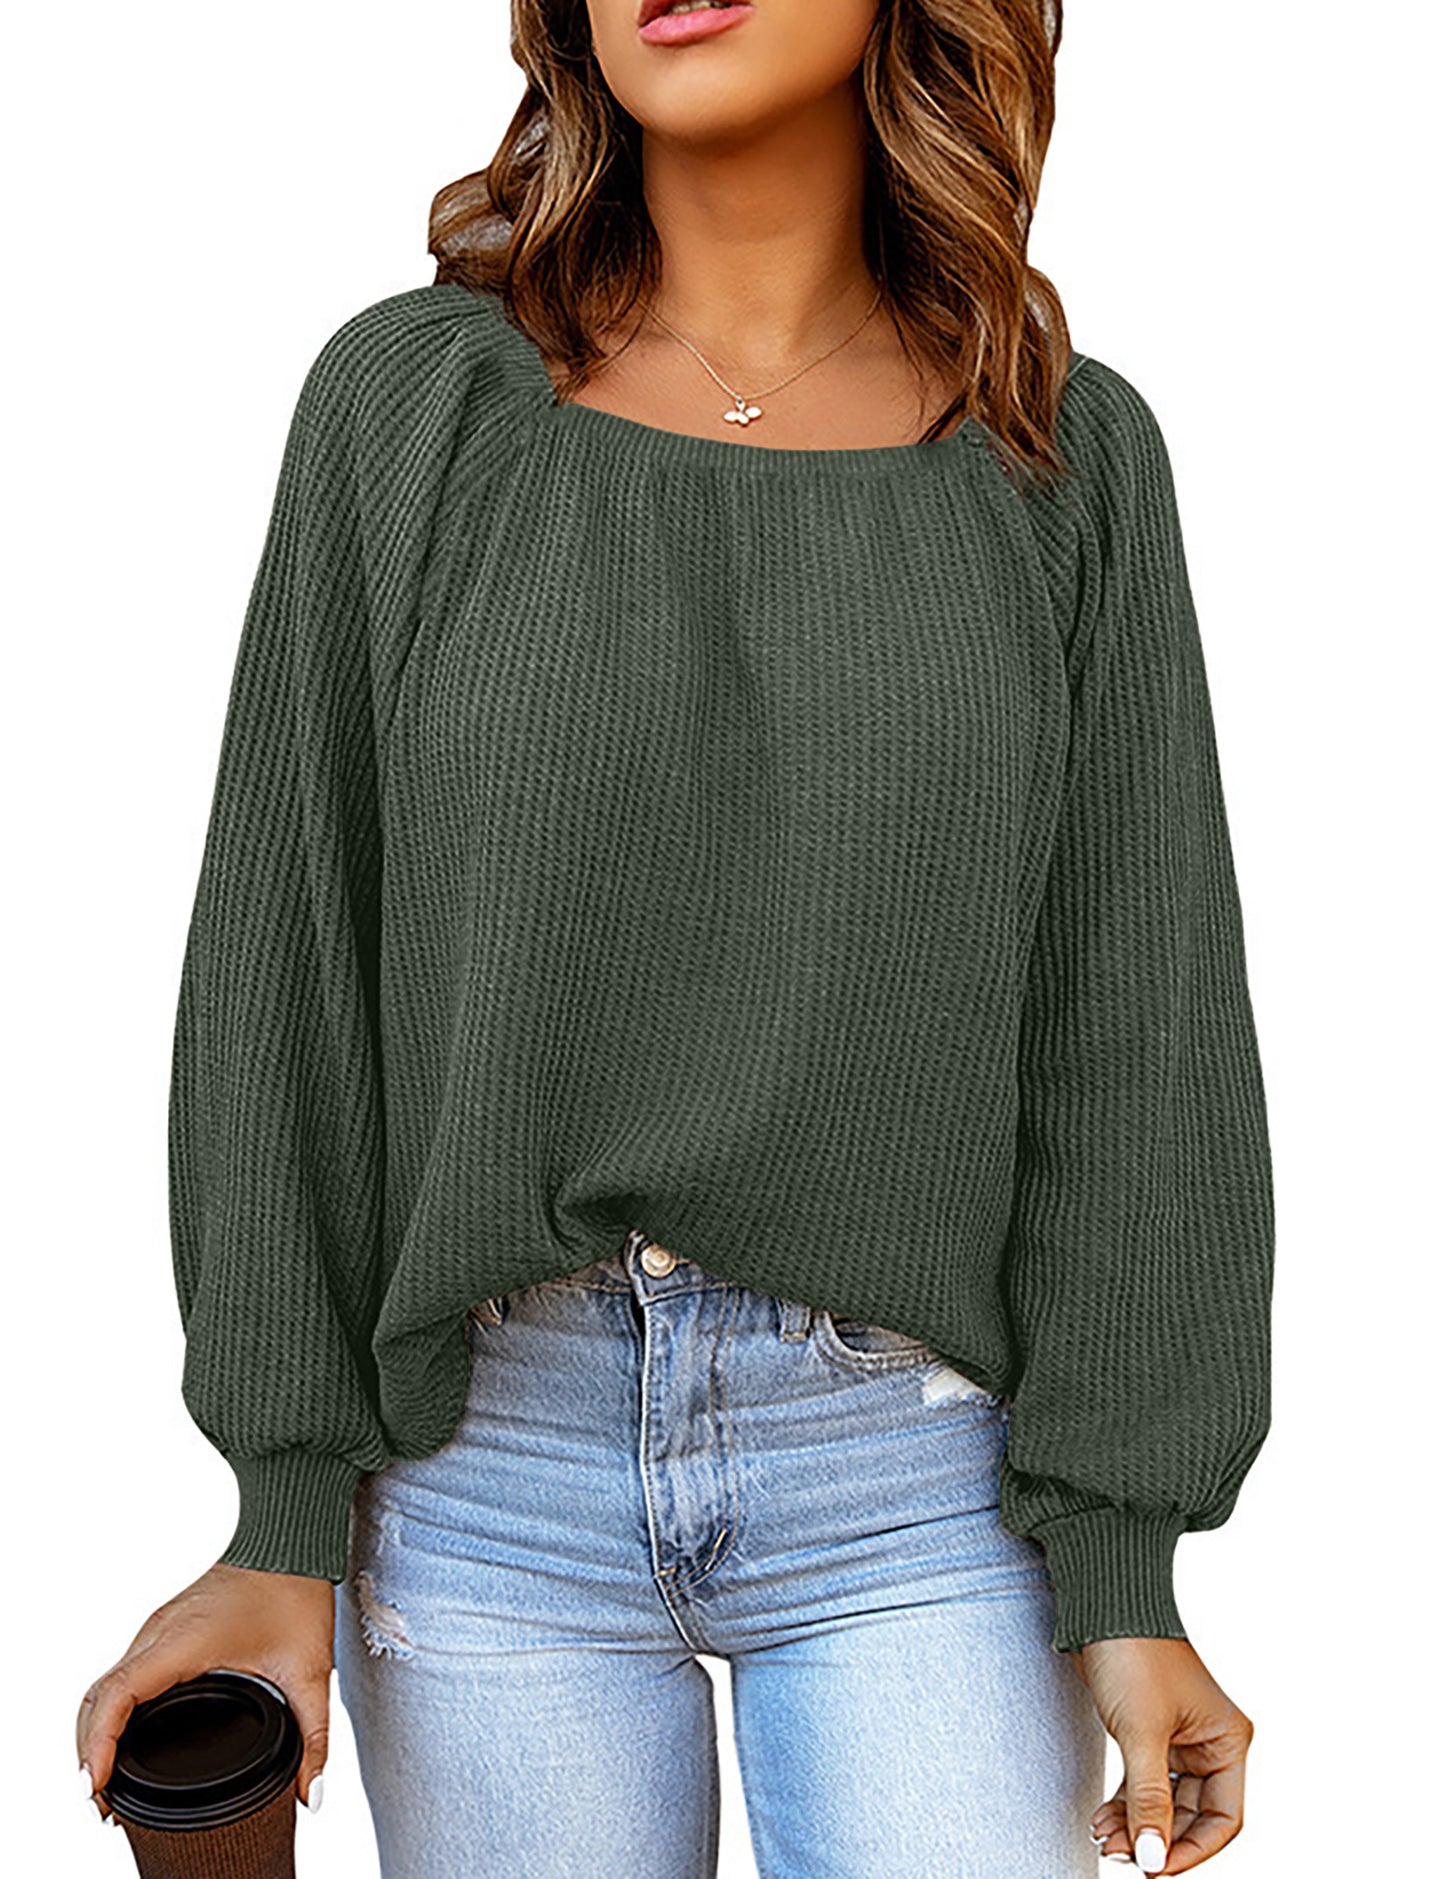 YESFASHION Square Neck Loose Casual Knitted Sweater Tops